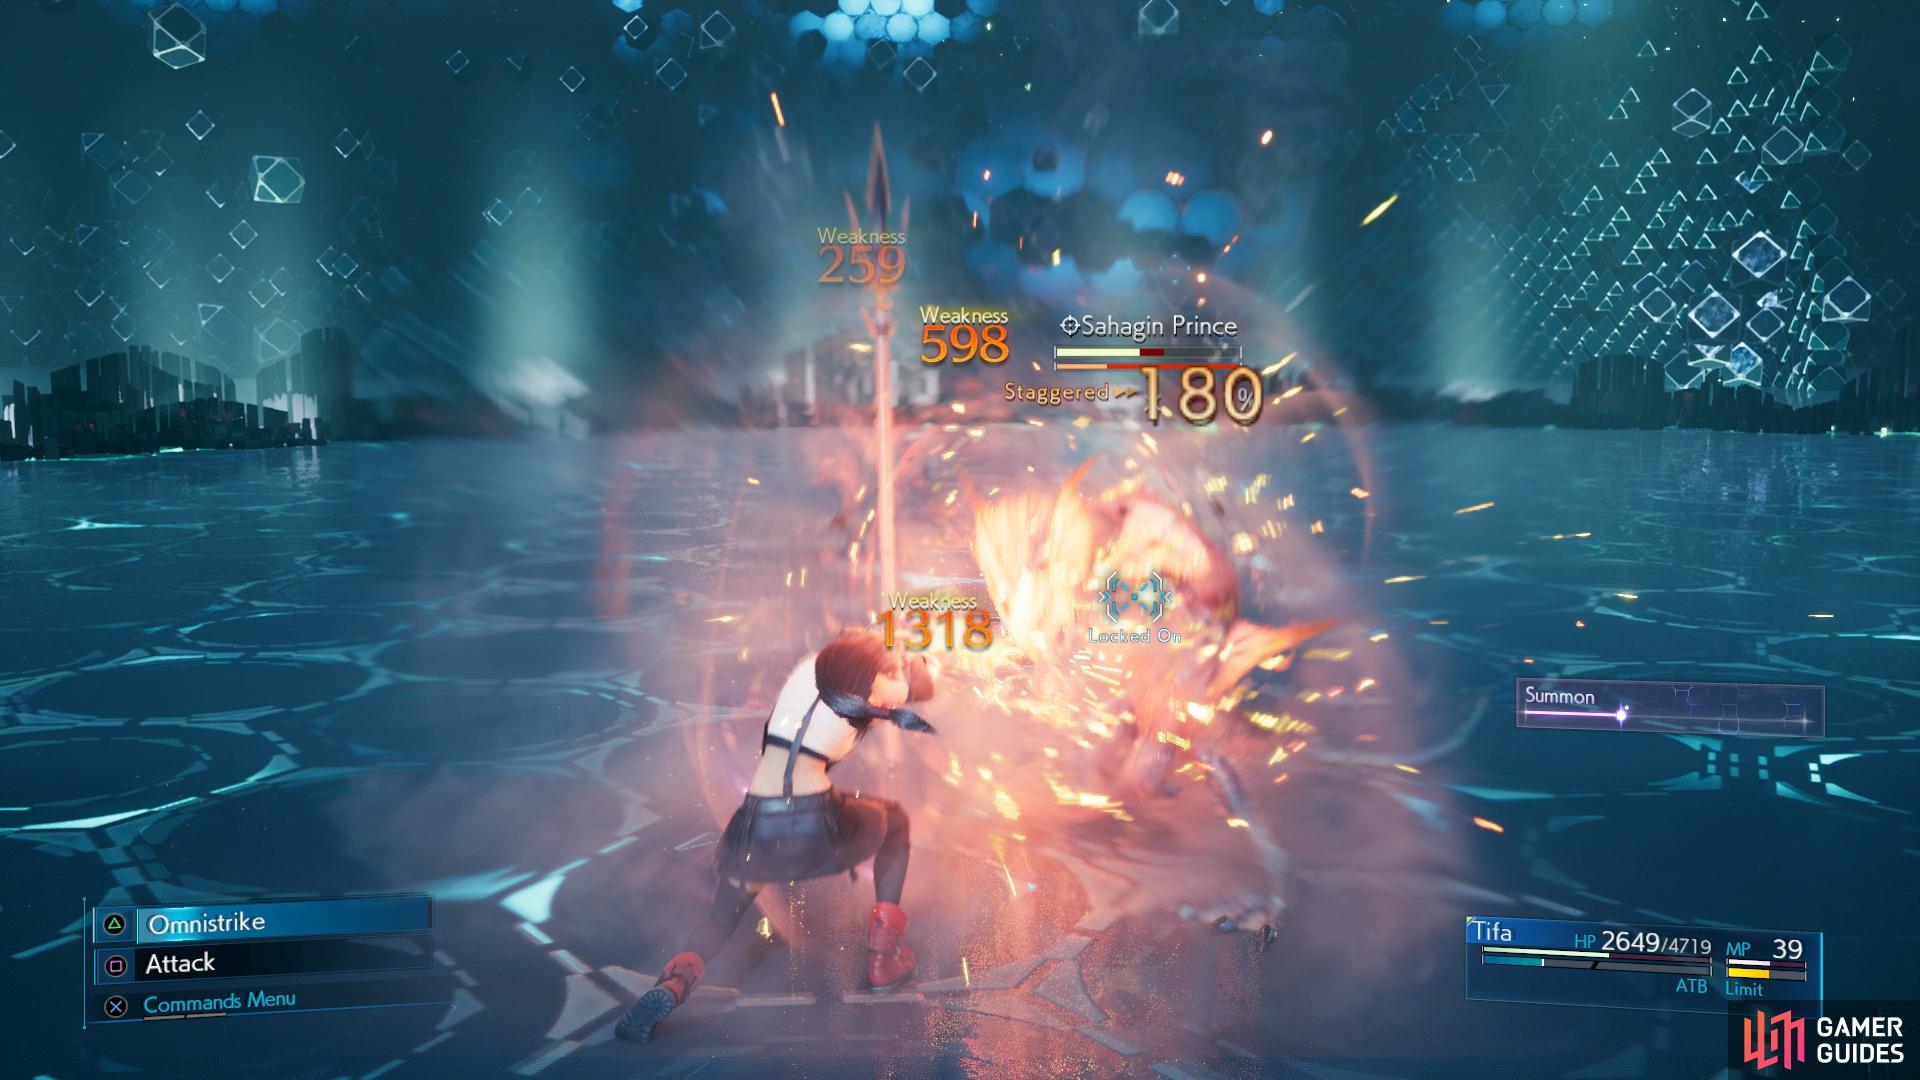 The Sahagin Prince is arguably Tifa's most difficult opponent, don't be afraid to use a Summon here if you need it.